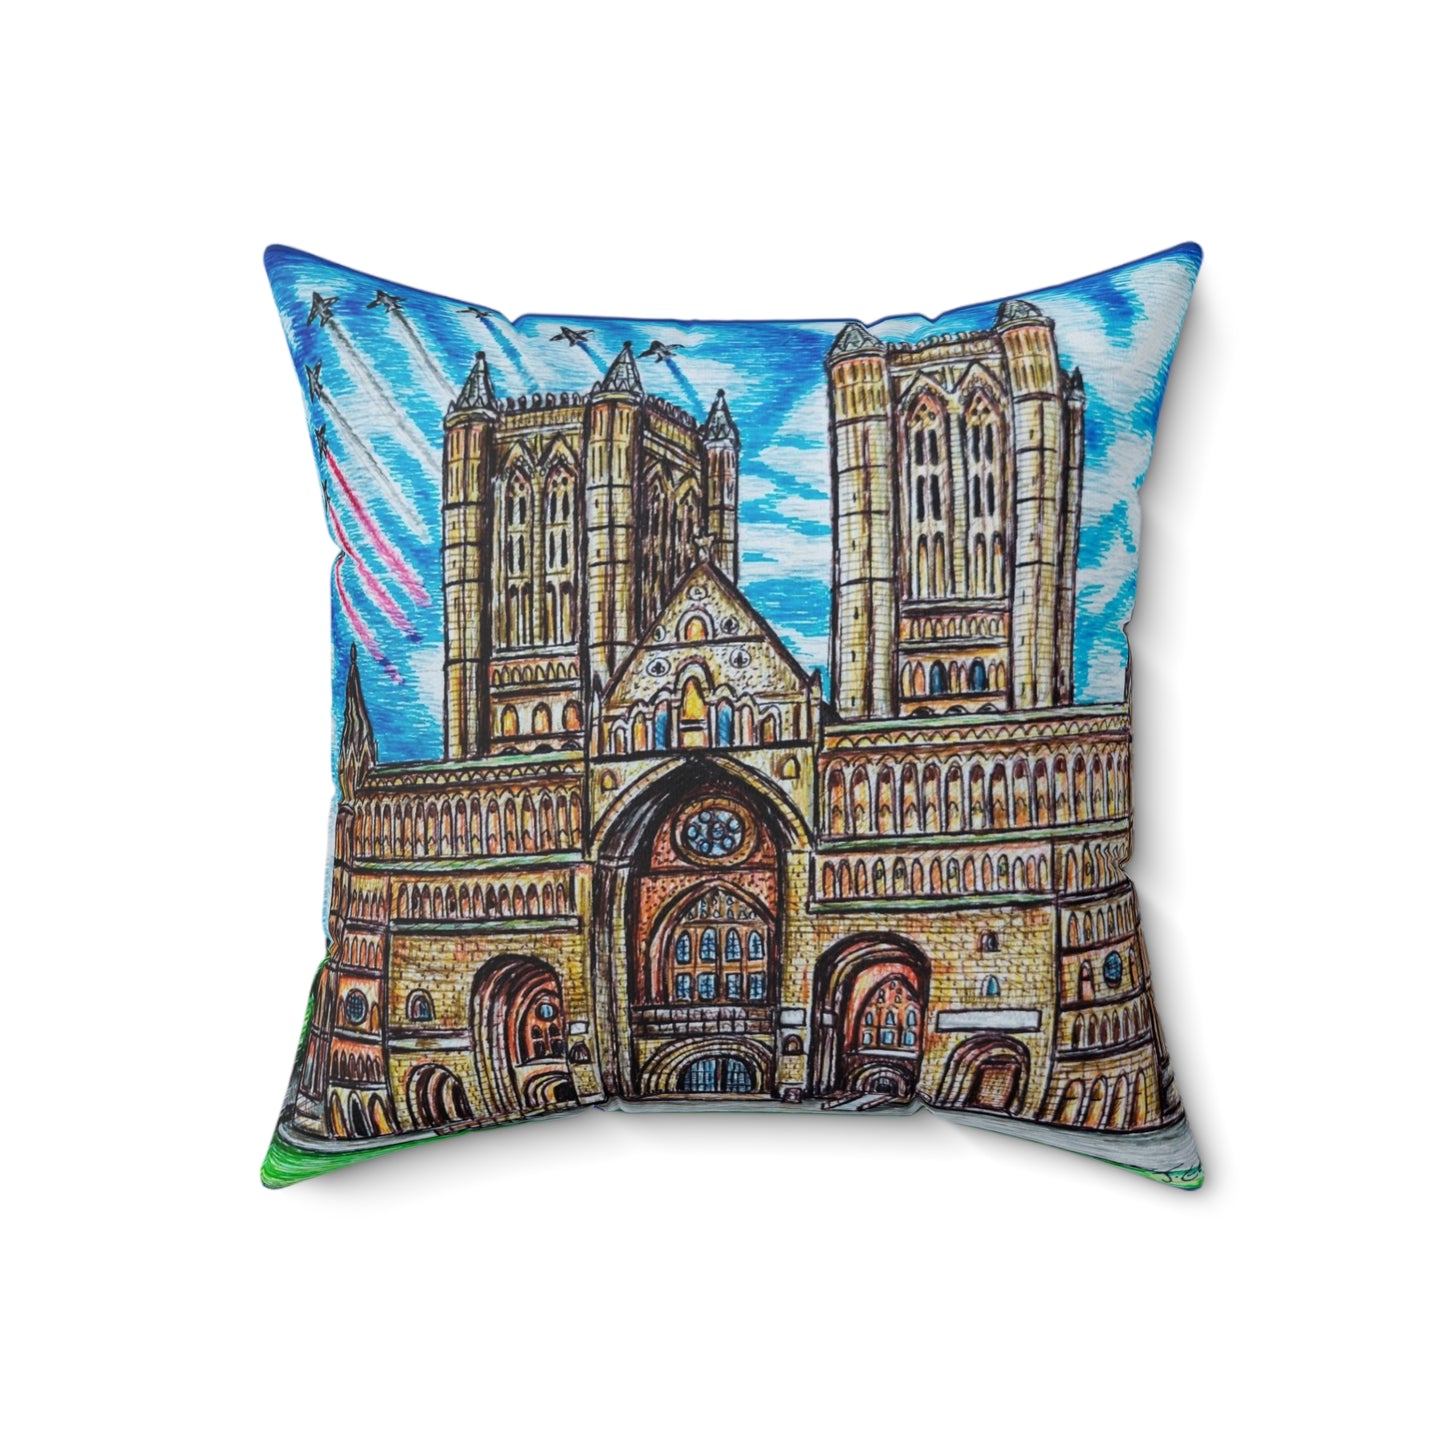 Indoor decorative cushion- Lincoln Cathedral